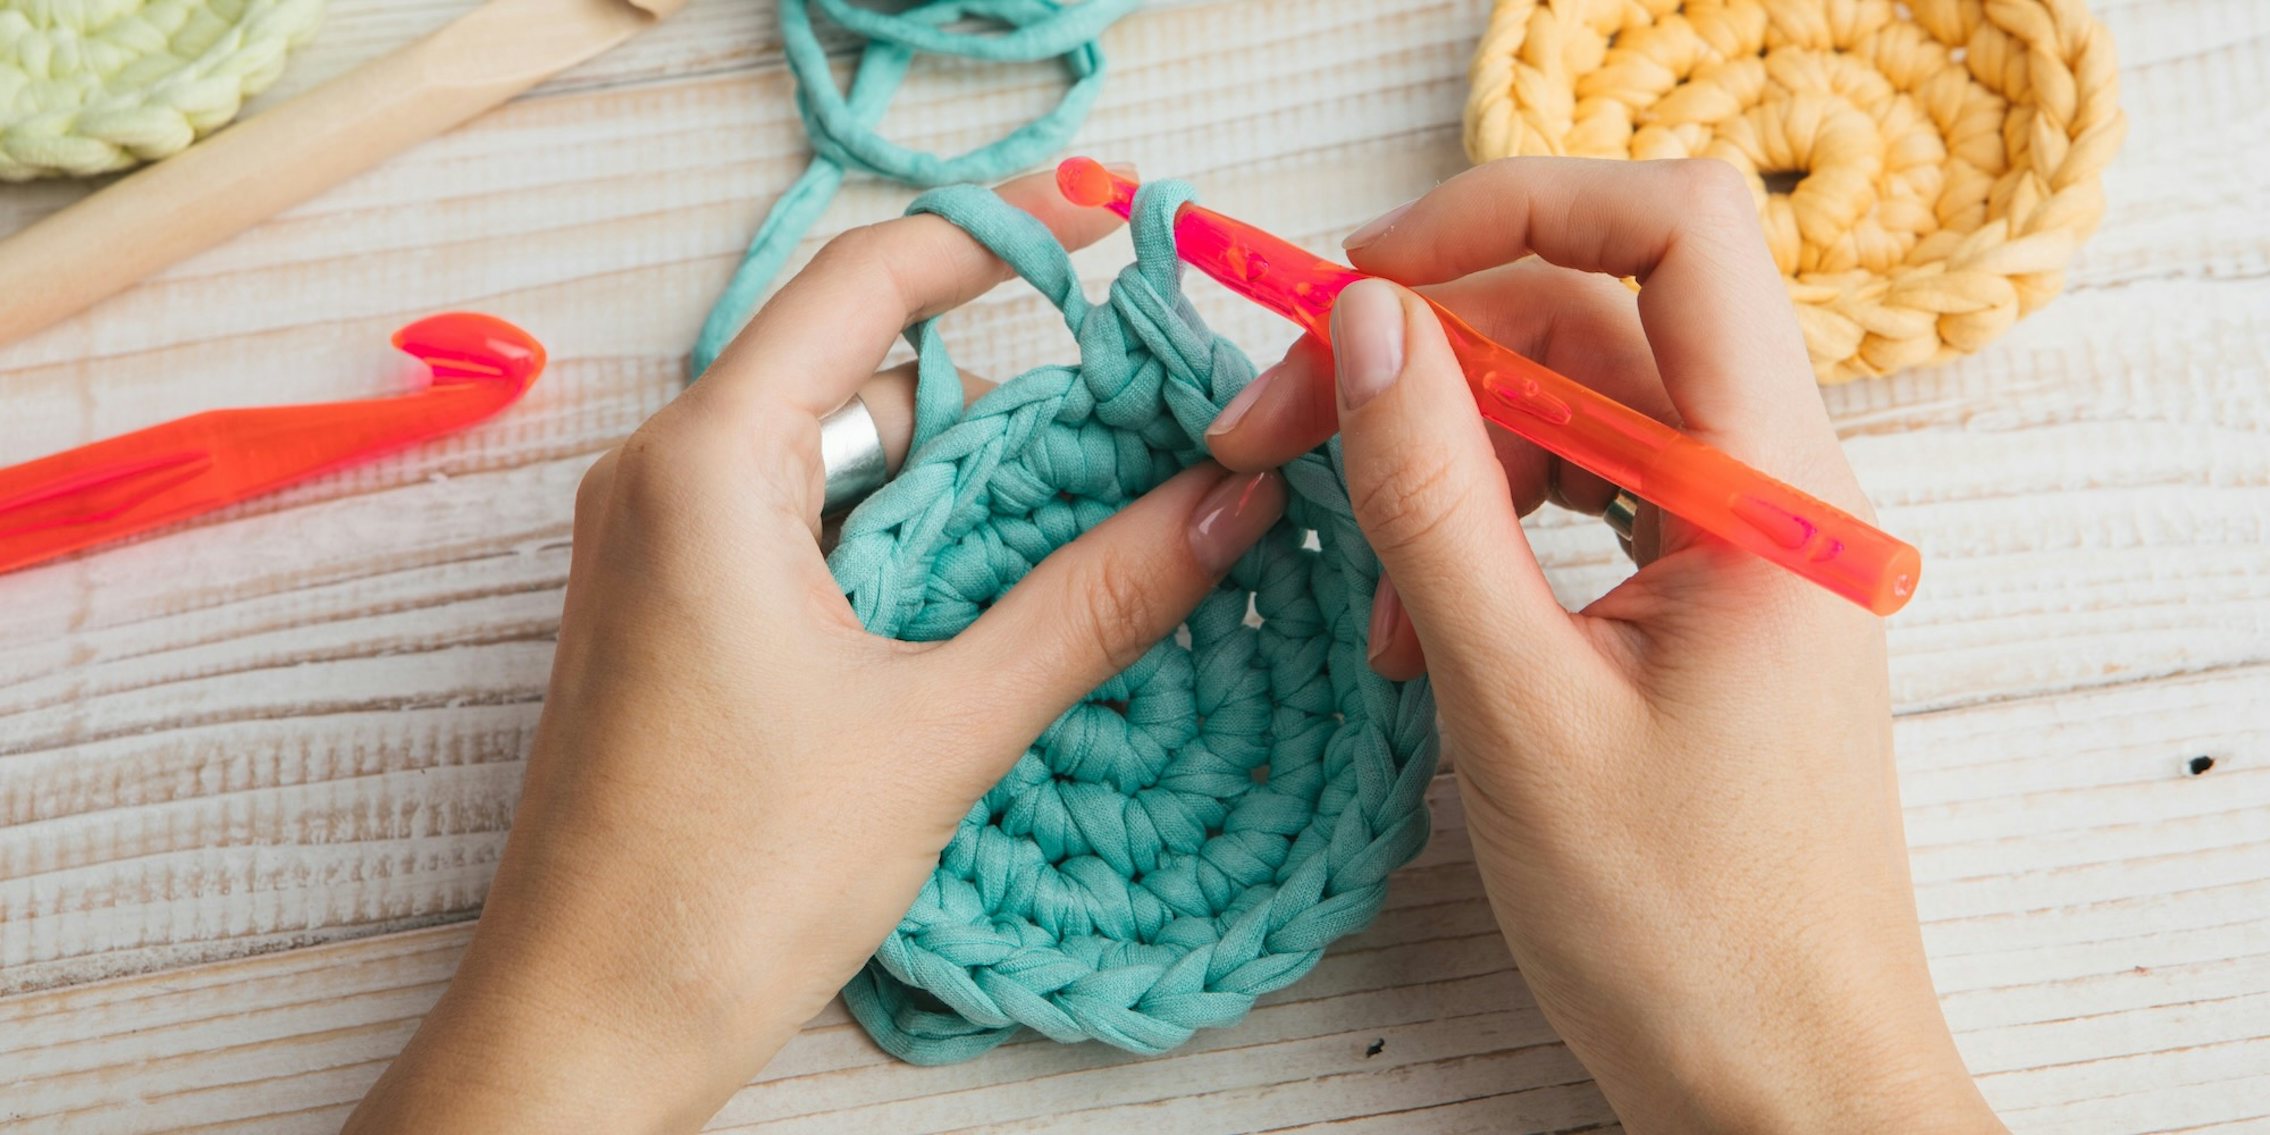 Crochet TikTokers are fighting misinformation about acrylic potholders